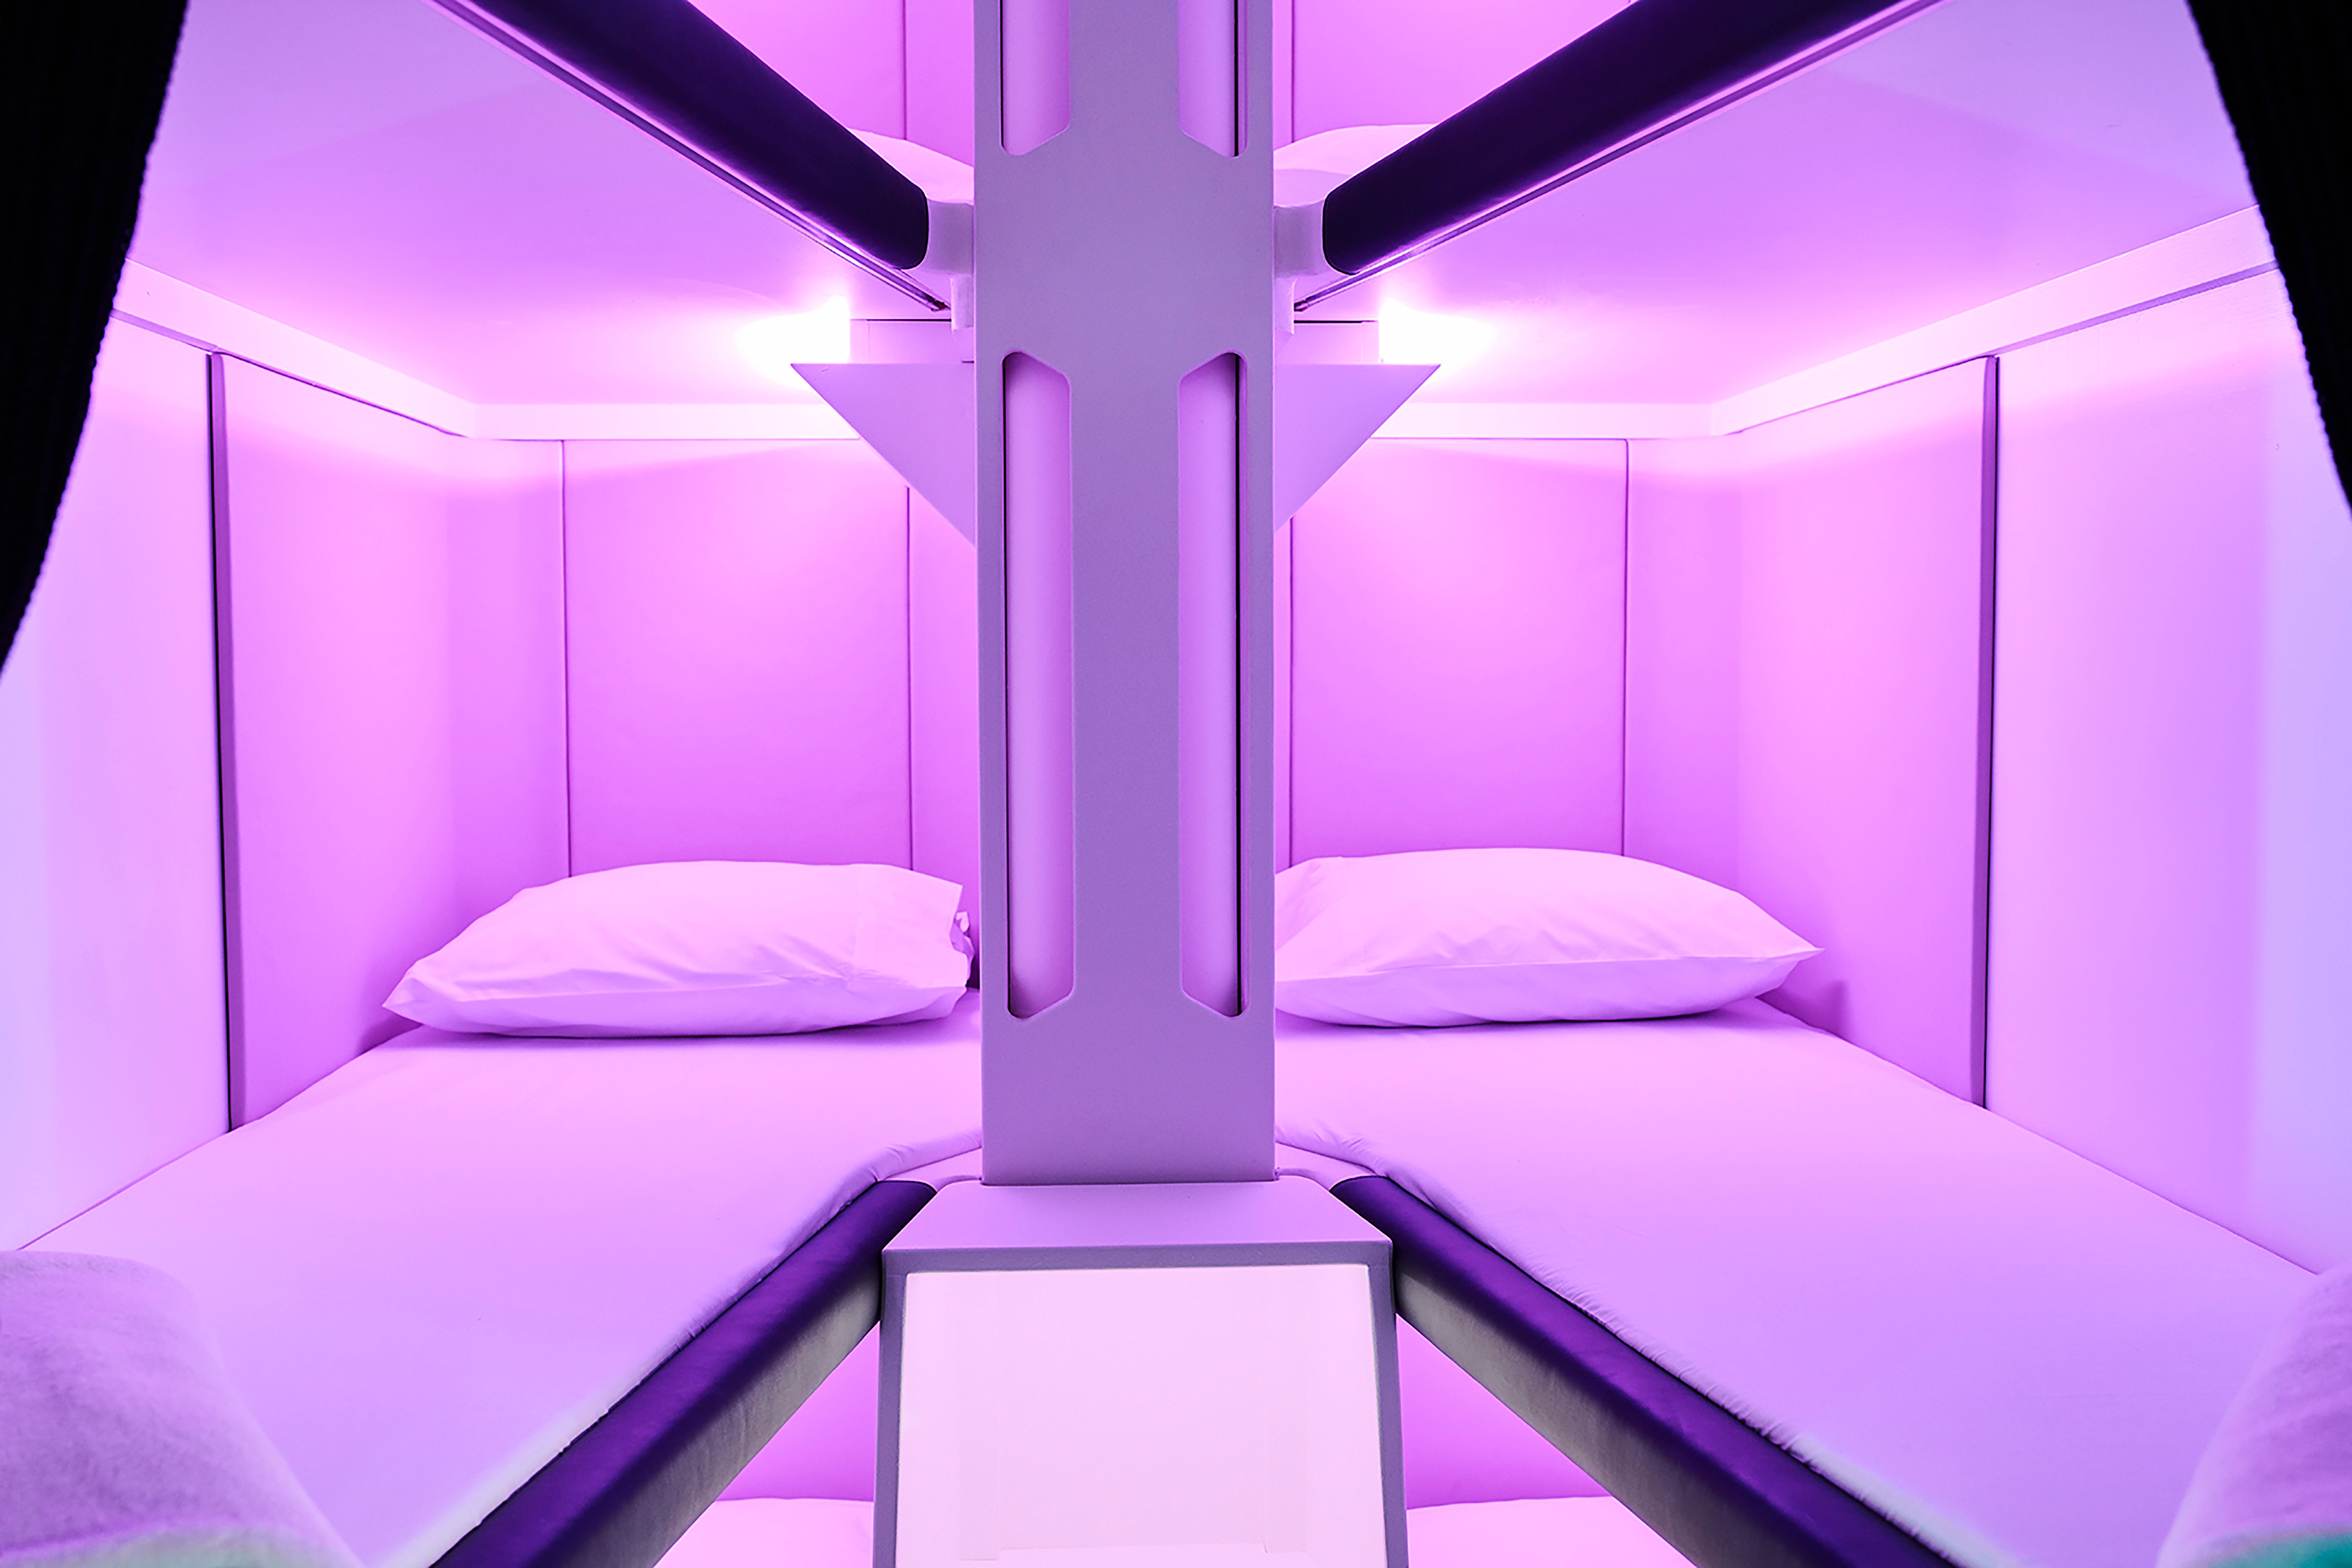 Air New Zealand’s Skynest beds for economy class passengers.